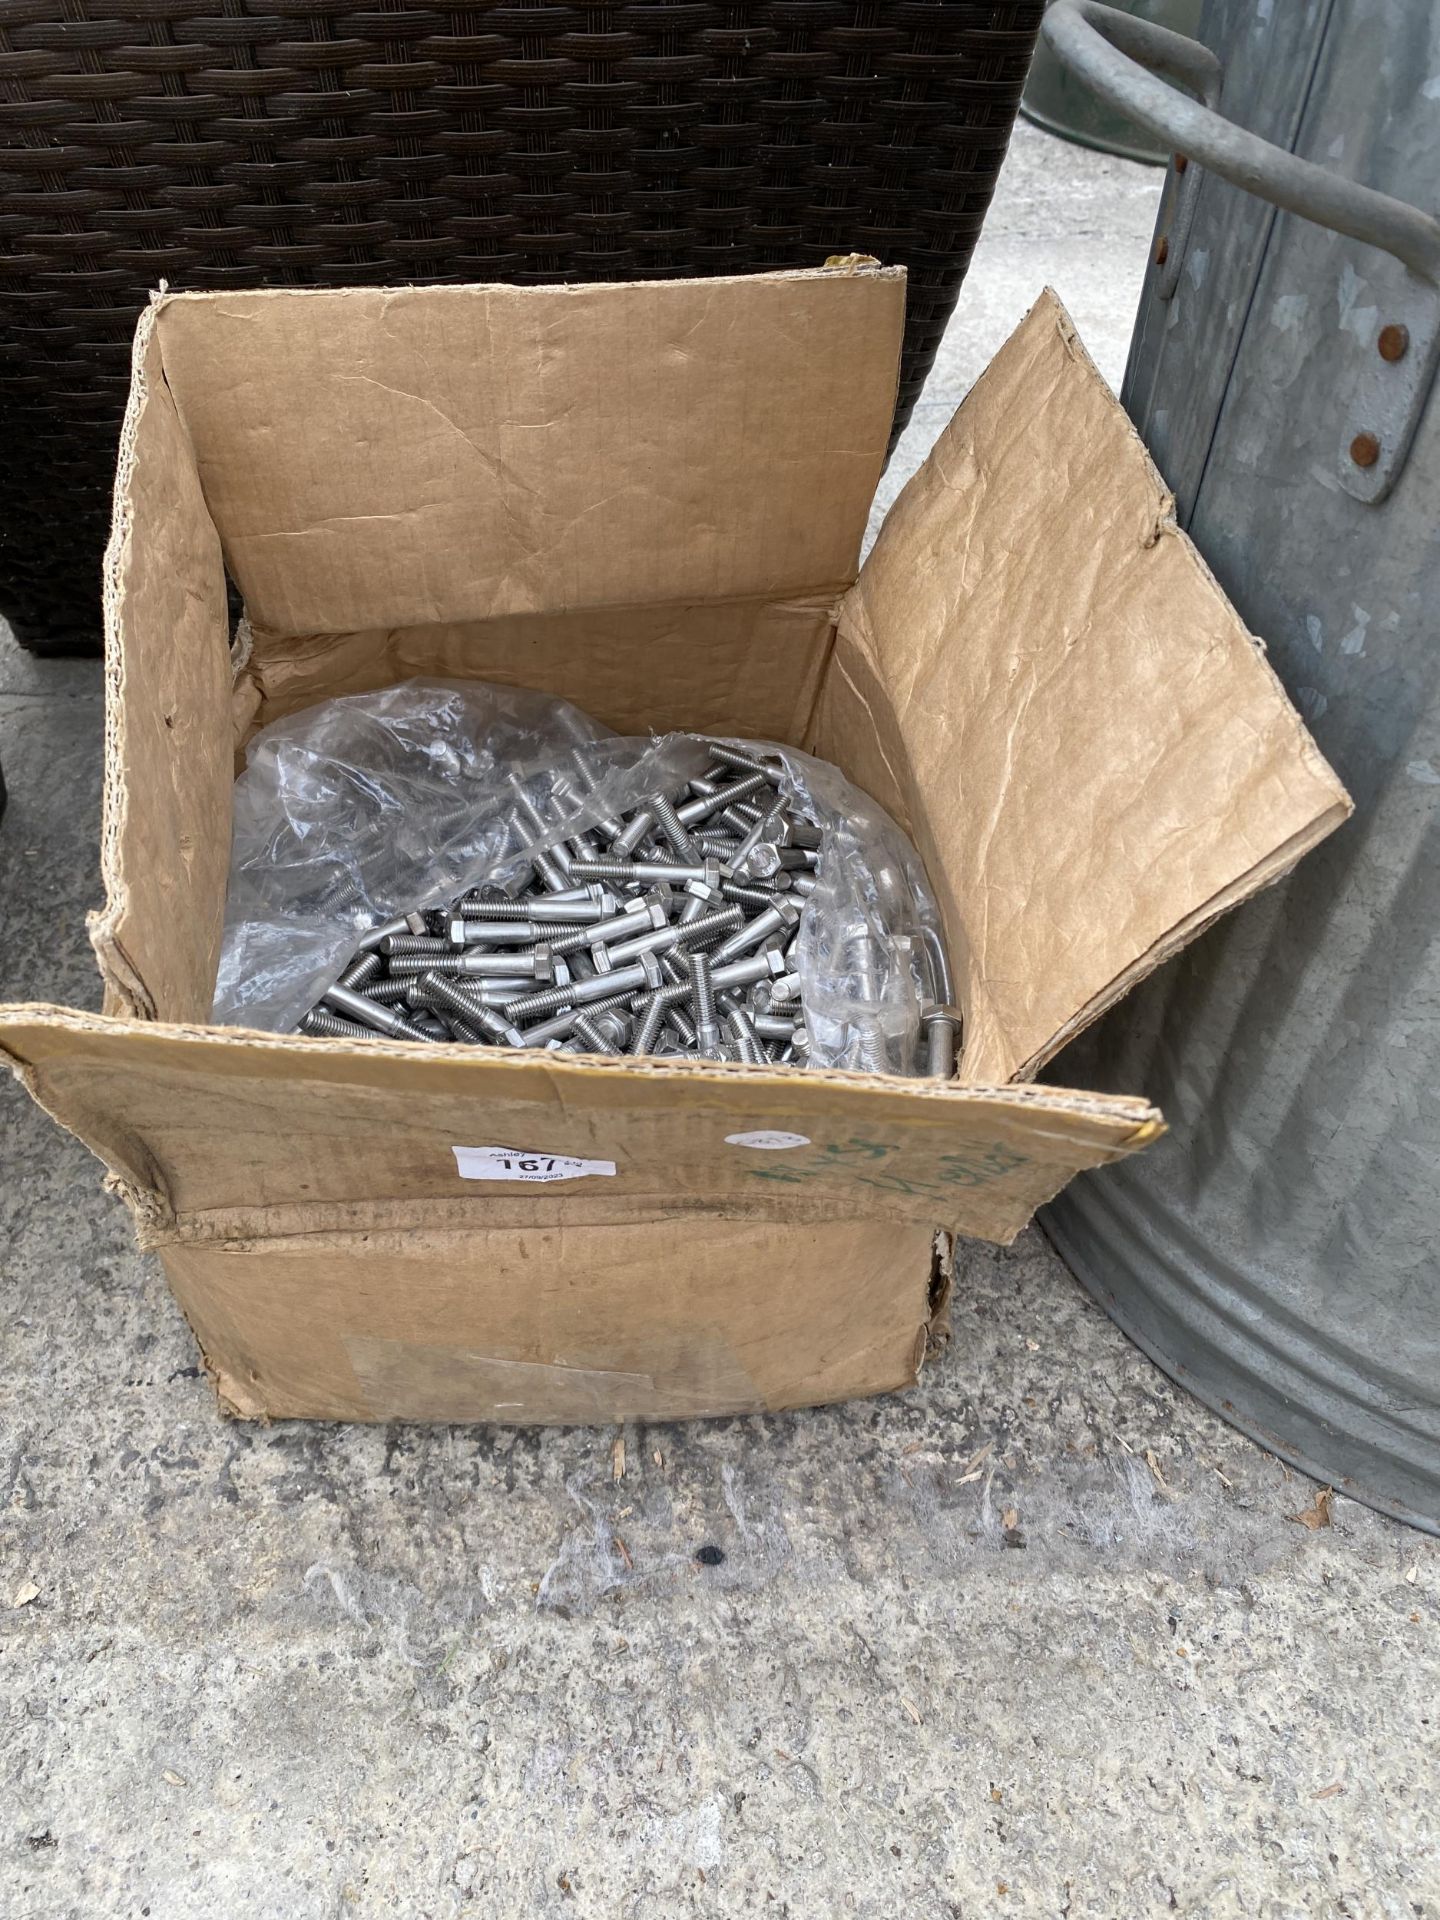 A LARGE QUANTITY OF M8X50 HEX BOLTS